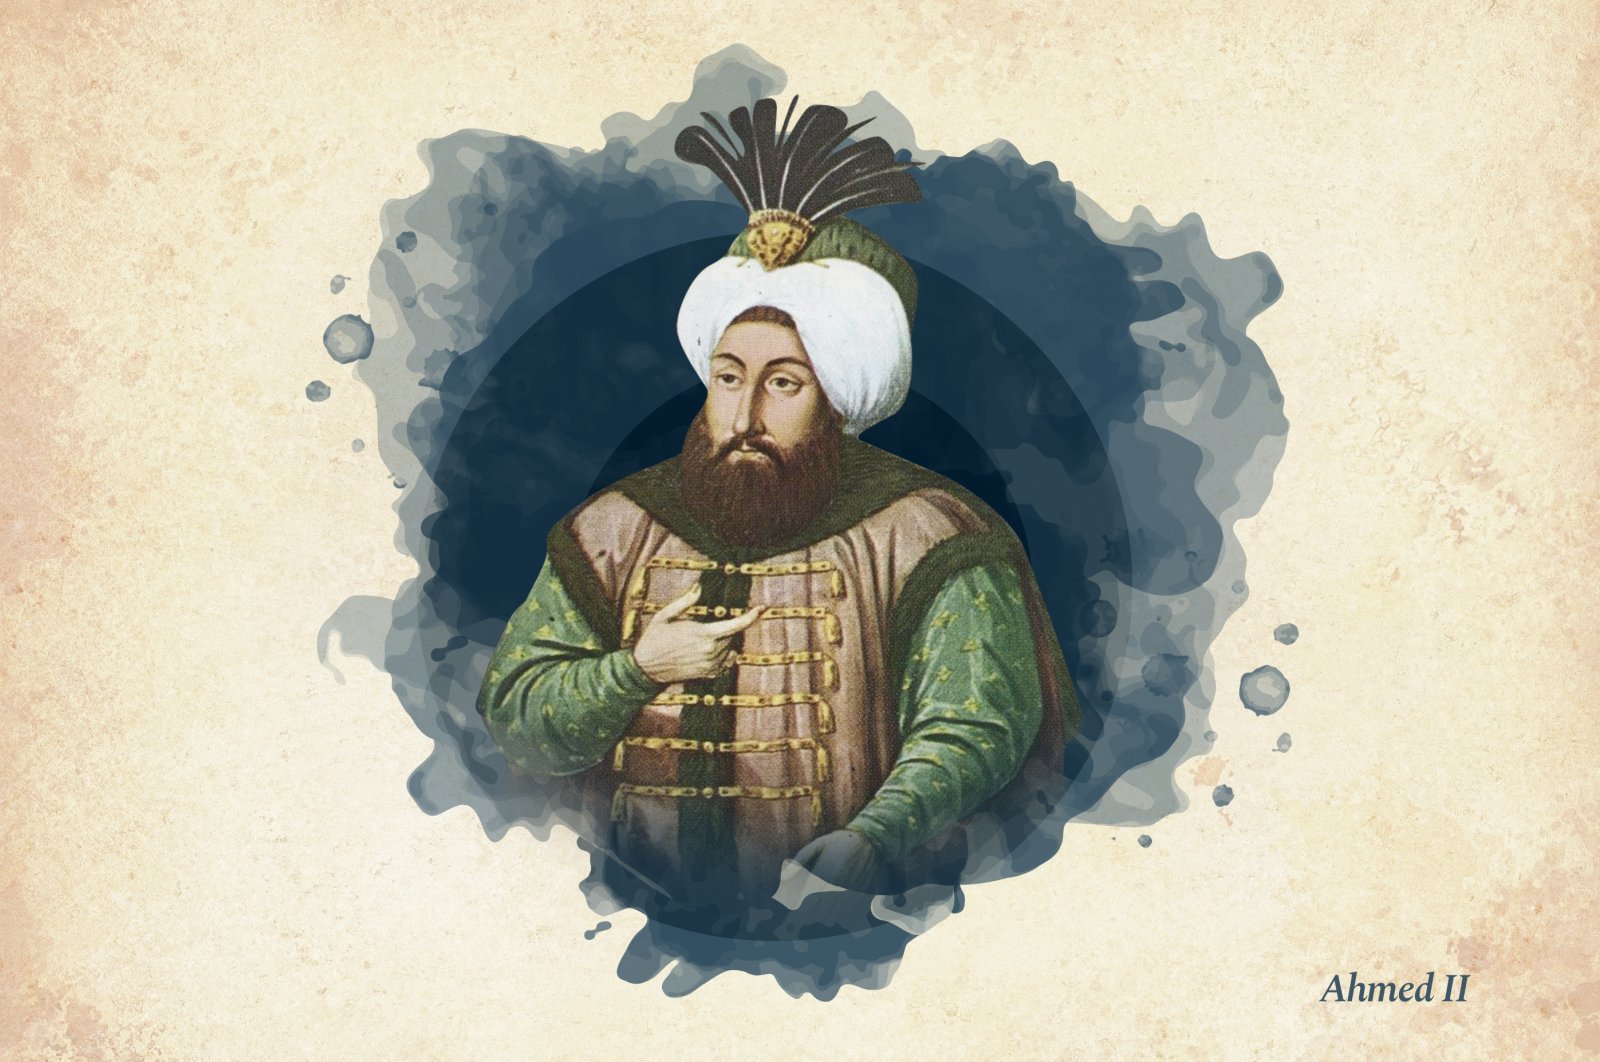 This widely used illustration shows Sultan Ahmed II, the 21st ruler of the Ottoman Empire.